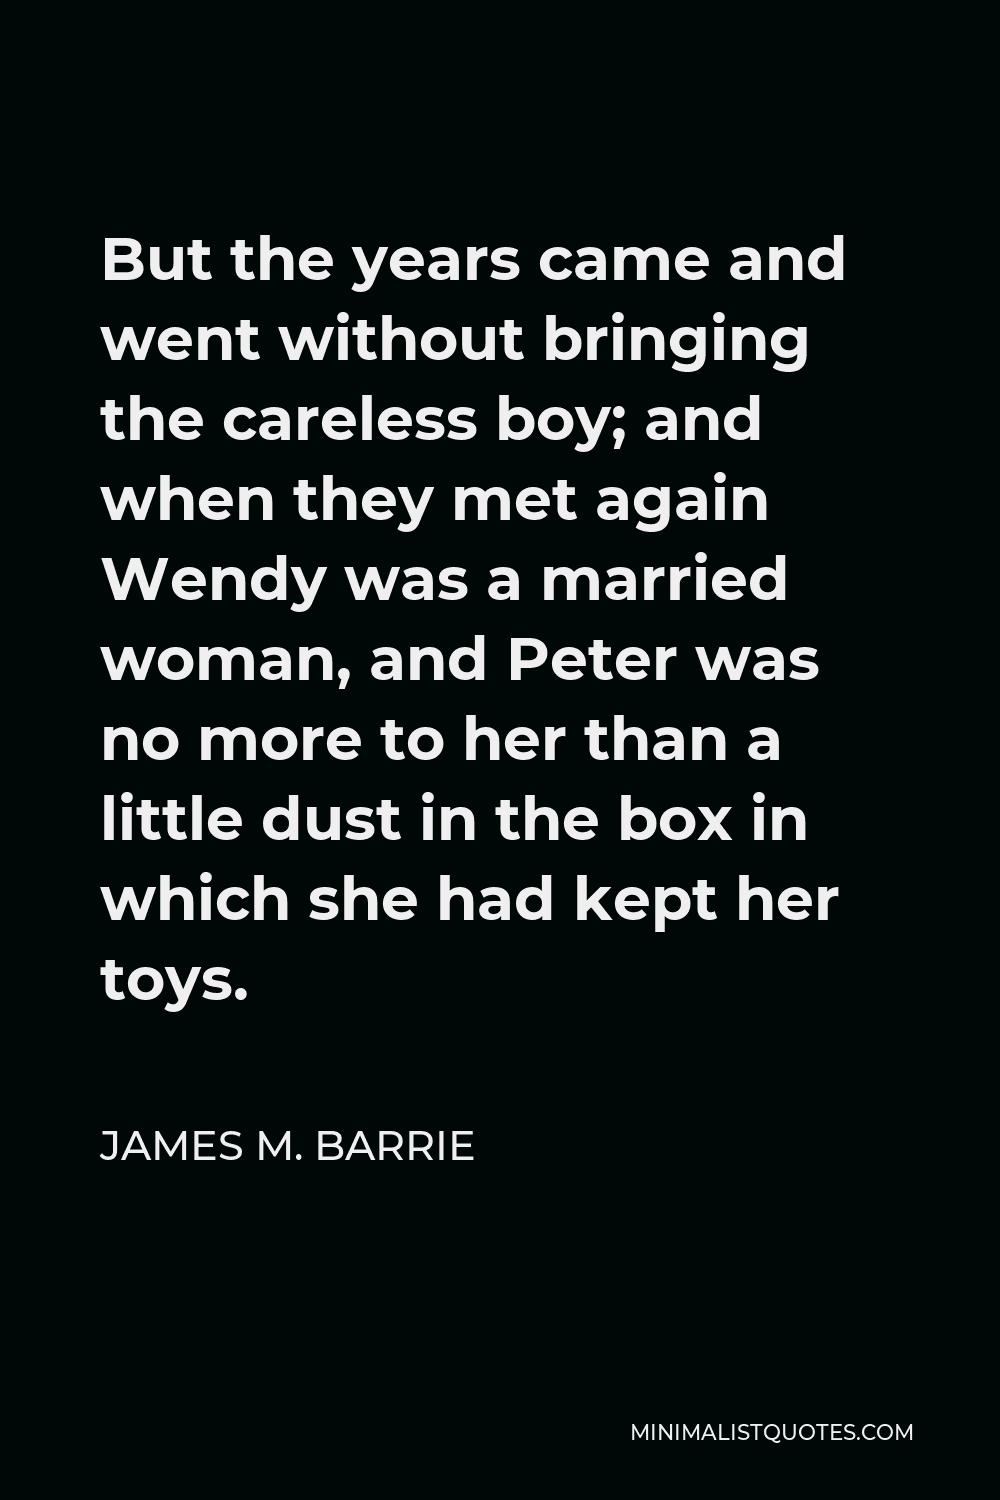 James M. Barrie Quote - But the years came and went without bringing the careless boy; and when they met again Wendy was a married woman, and Peter was no more to her than a little dust in the box in which she had kept her toys.